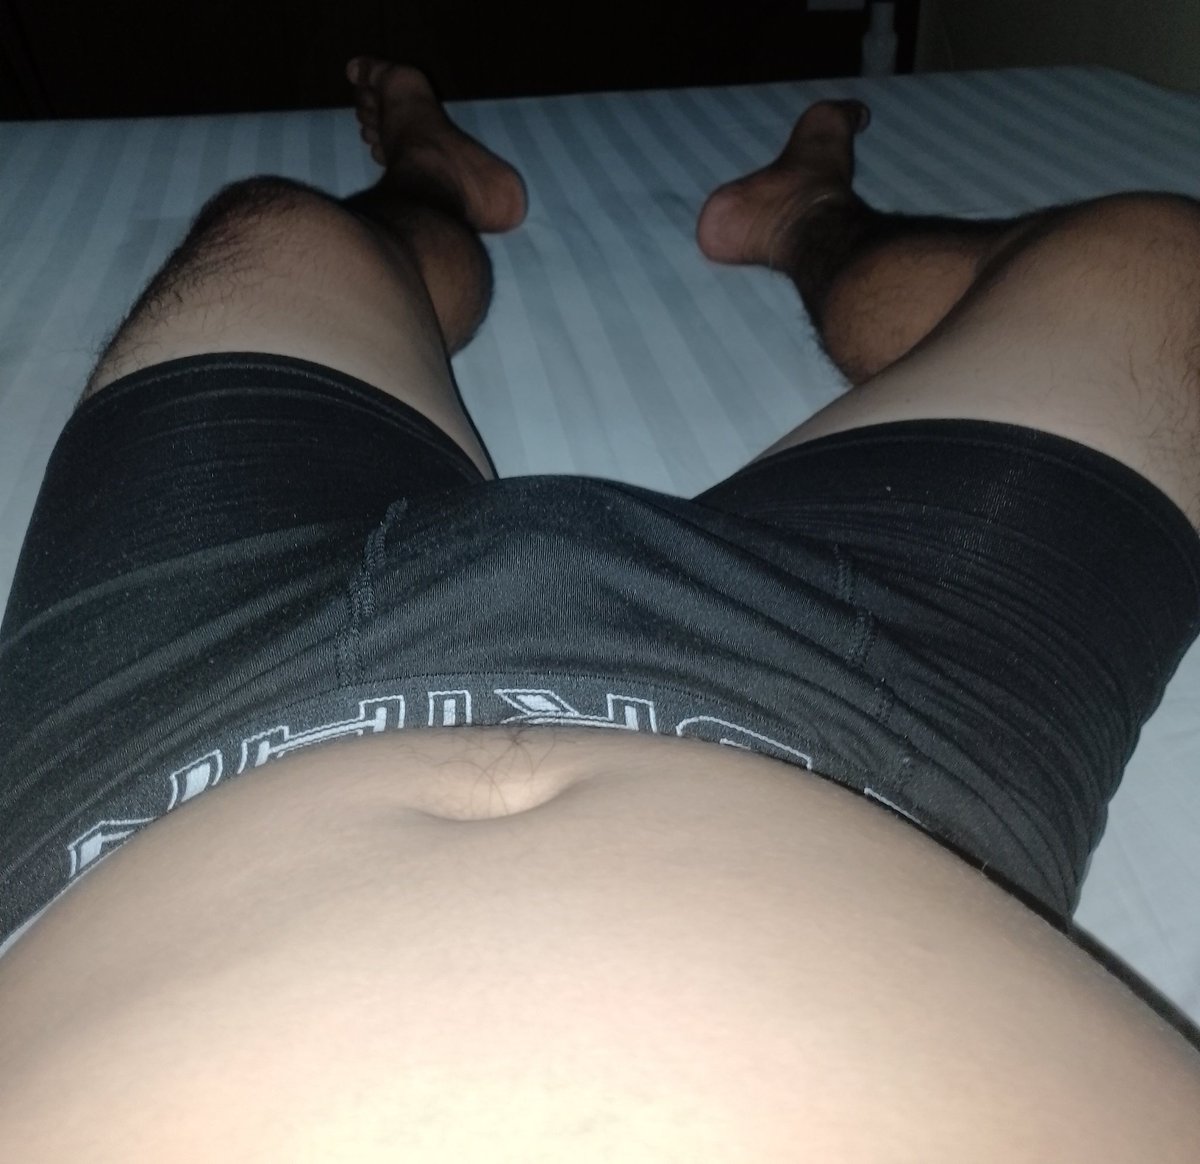 Available now in GENSAN mga Boss 💪 -Massage And Brozilian Waxing with place 📞09557505226 #altergensan #alterkoronadal #alterSox #SoxMasseur #SoxWaxer